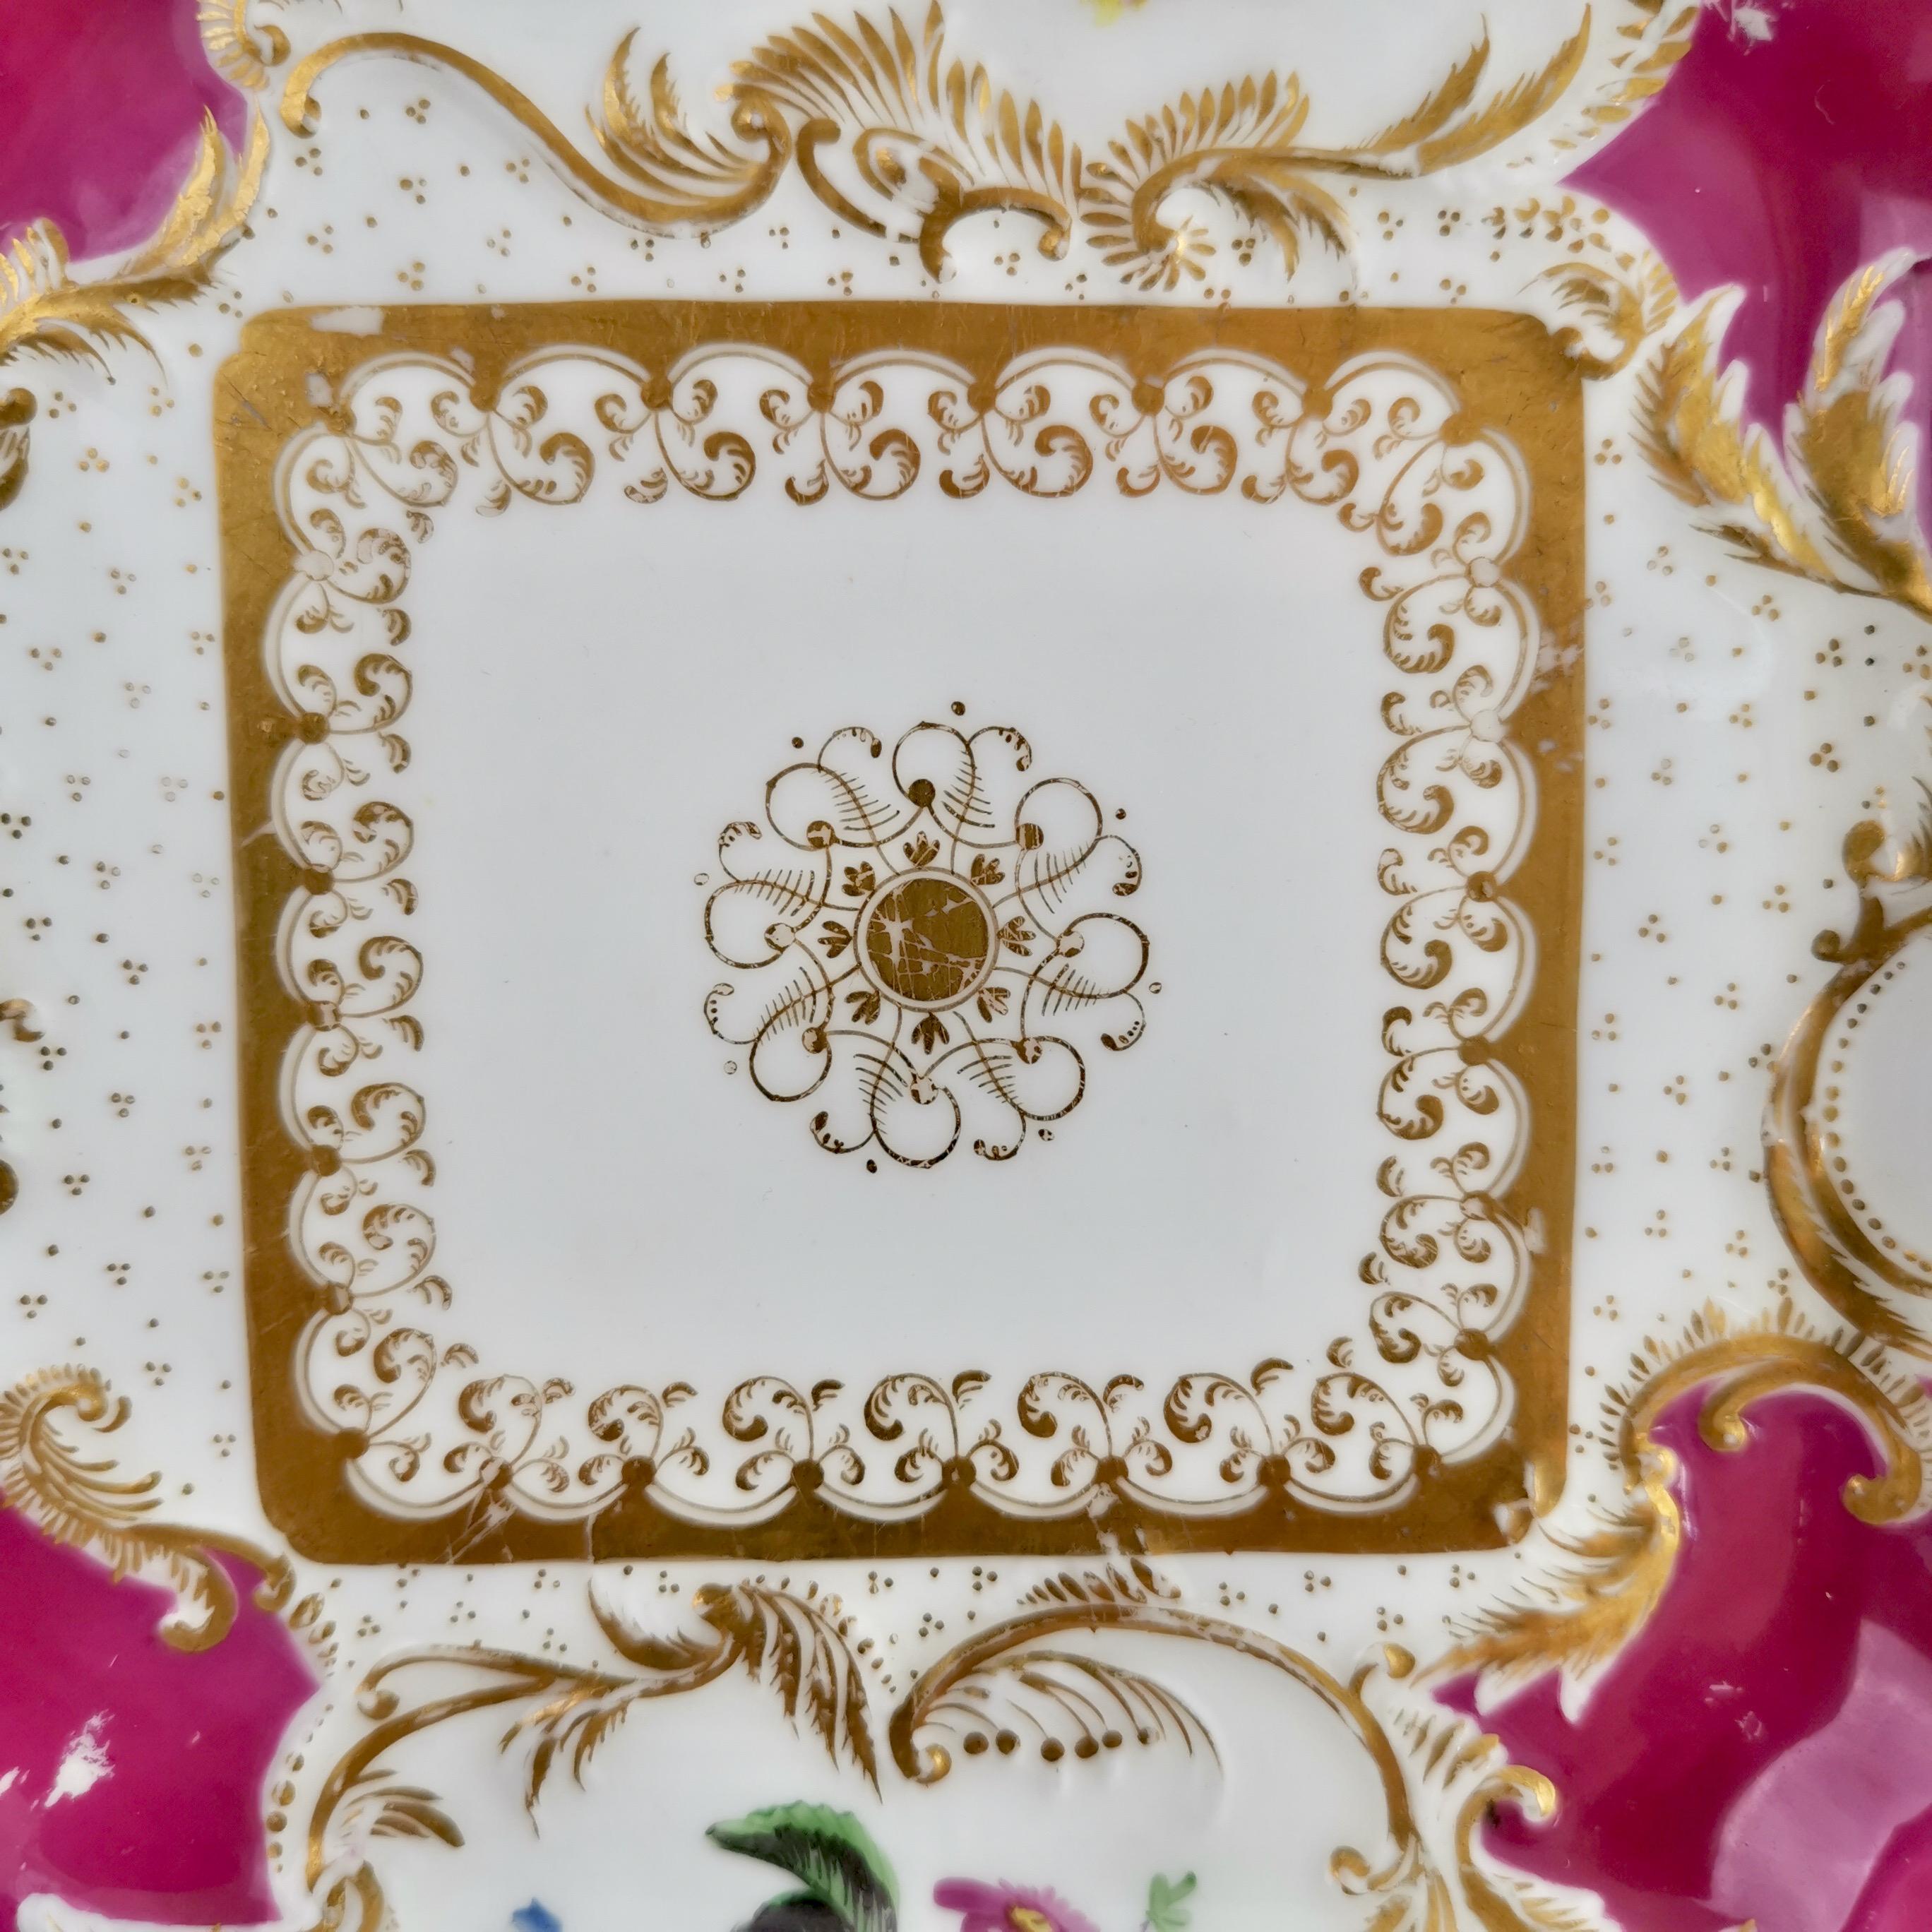 English Minton Porcelain Cake Plate, Maroon with Flowers, Rococo Revival, ca 1830